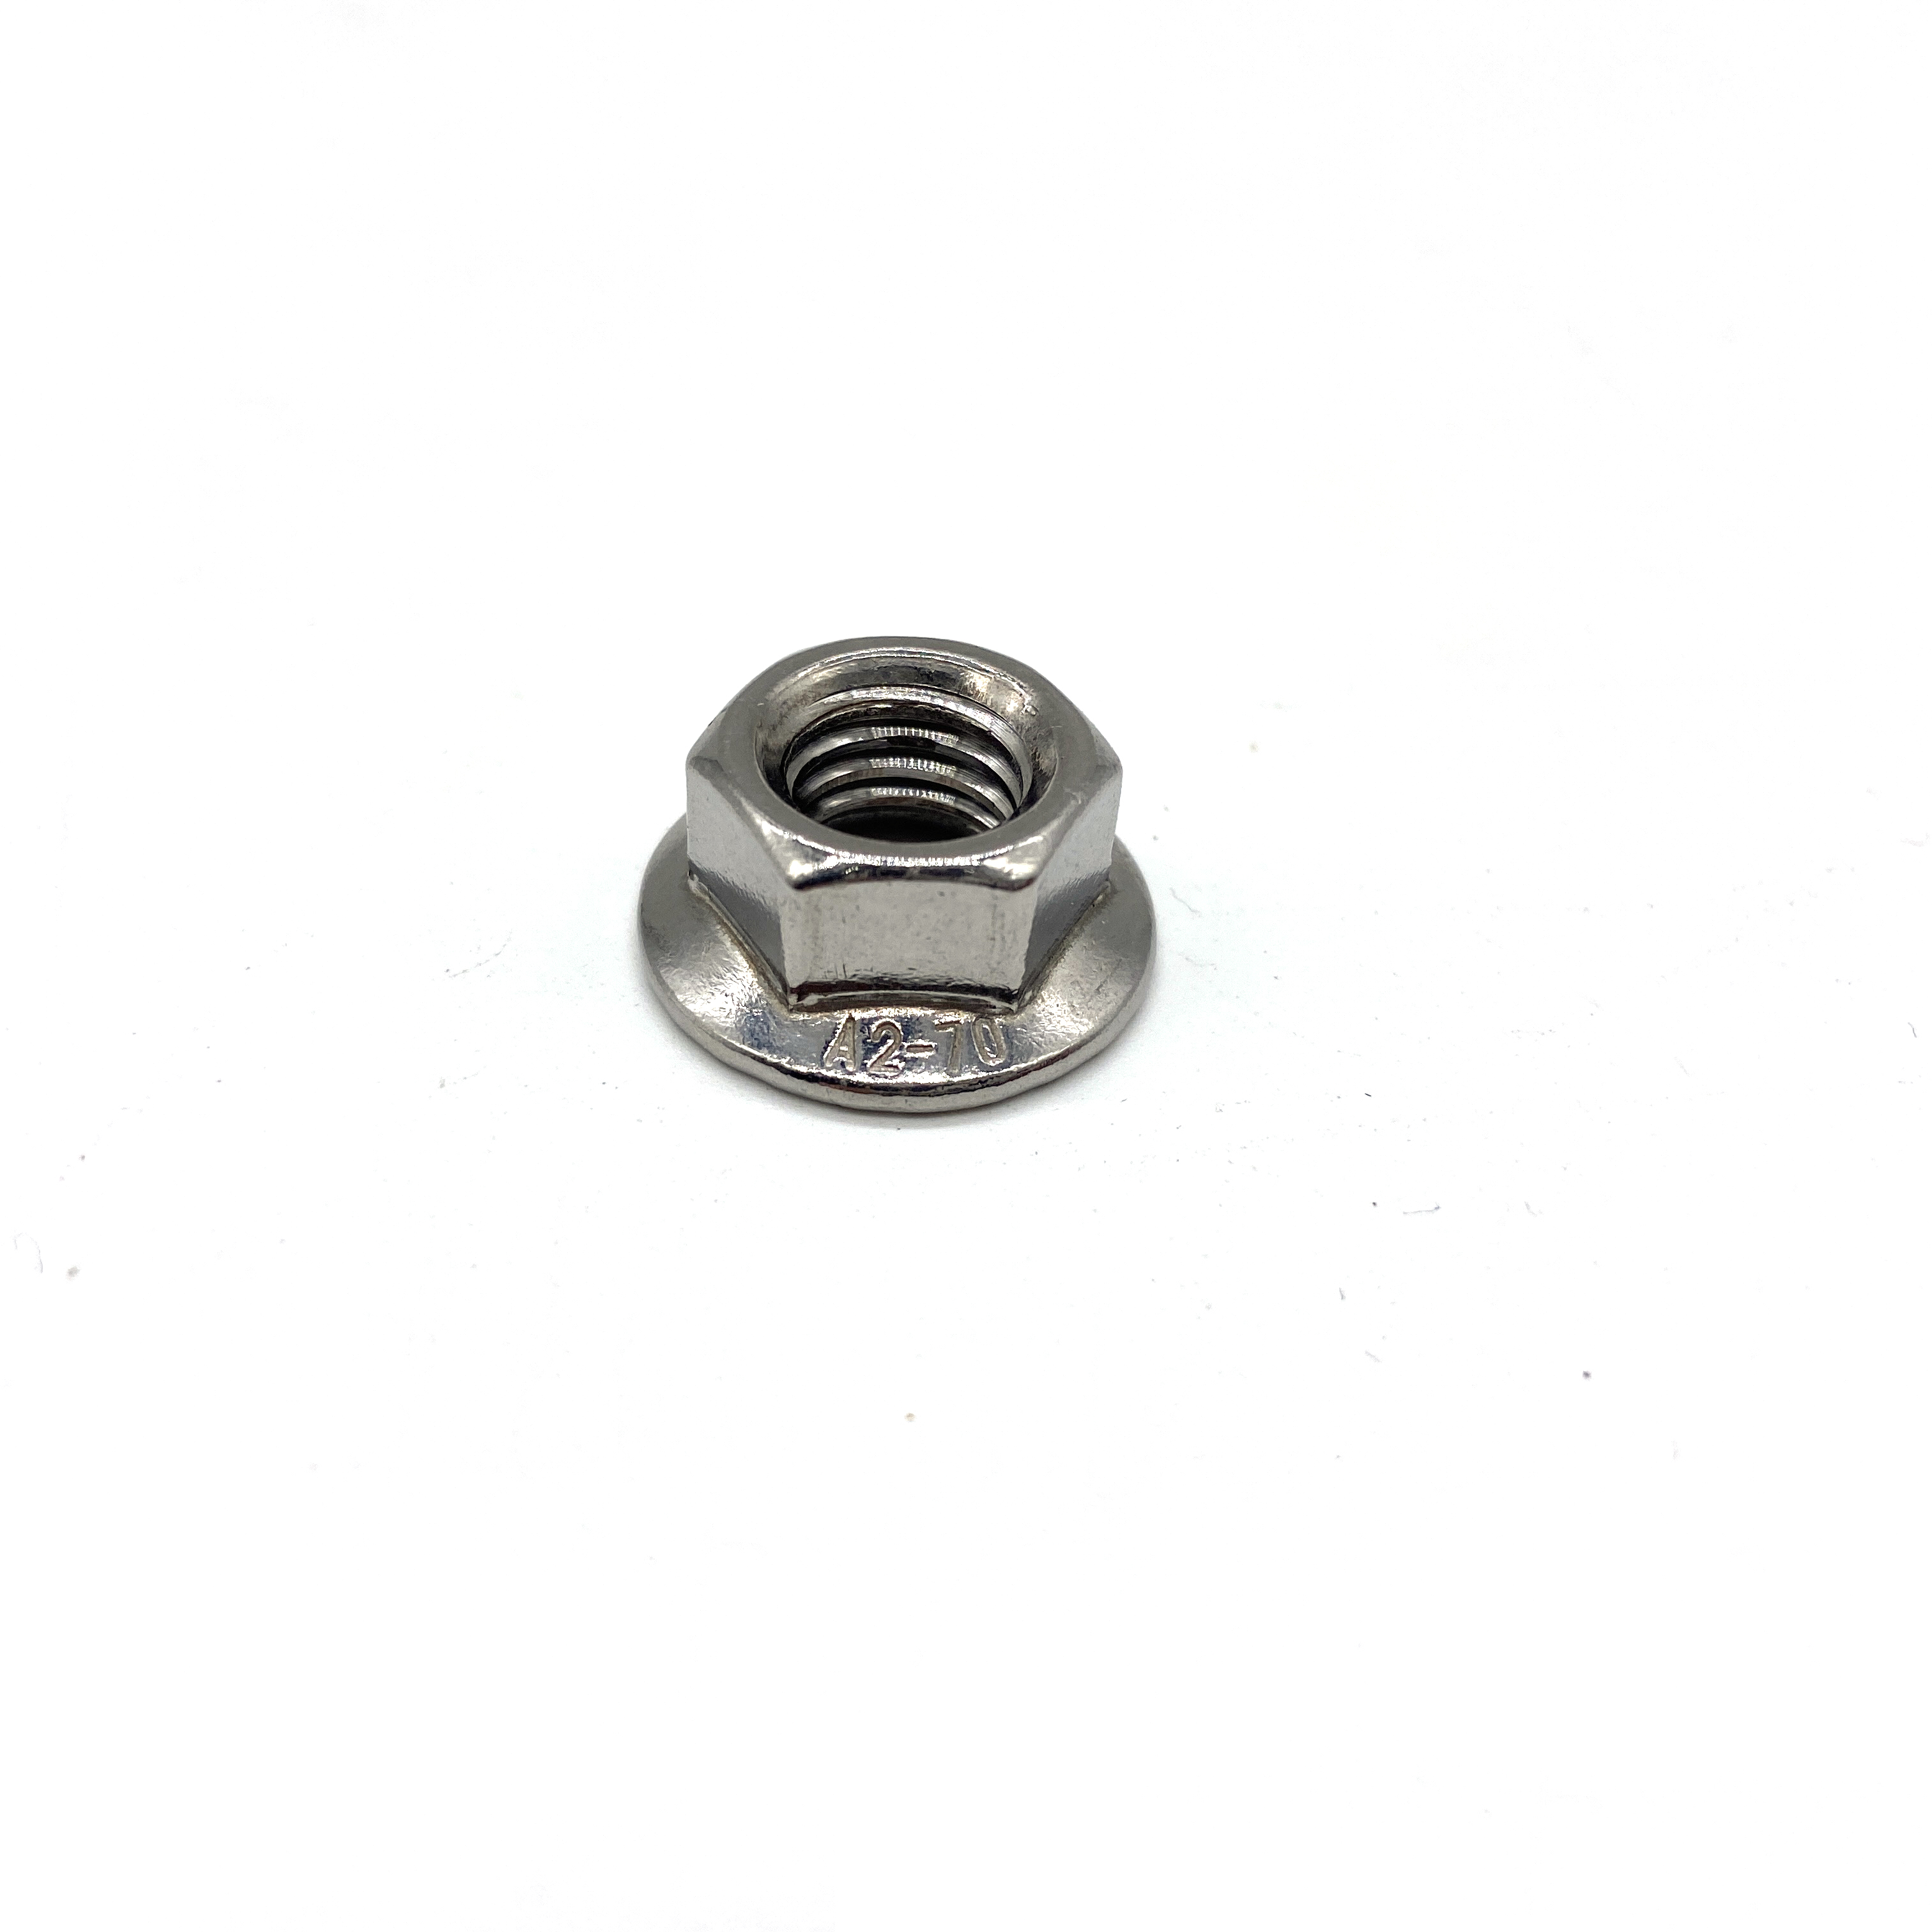 ASTM DIN 6923 M6 Stainless Steel A2 A4 Hex Flange Nut